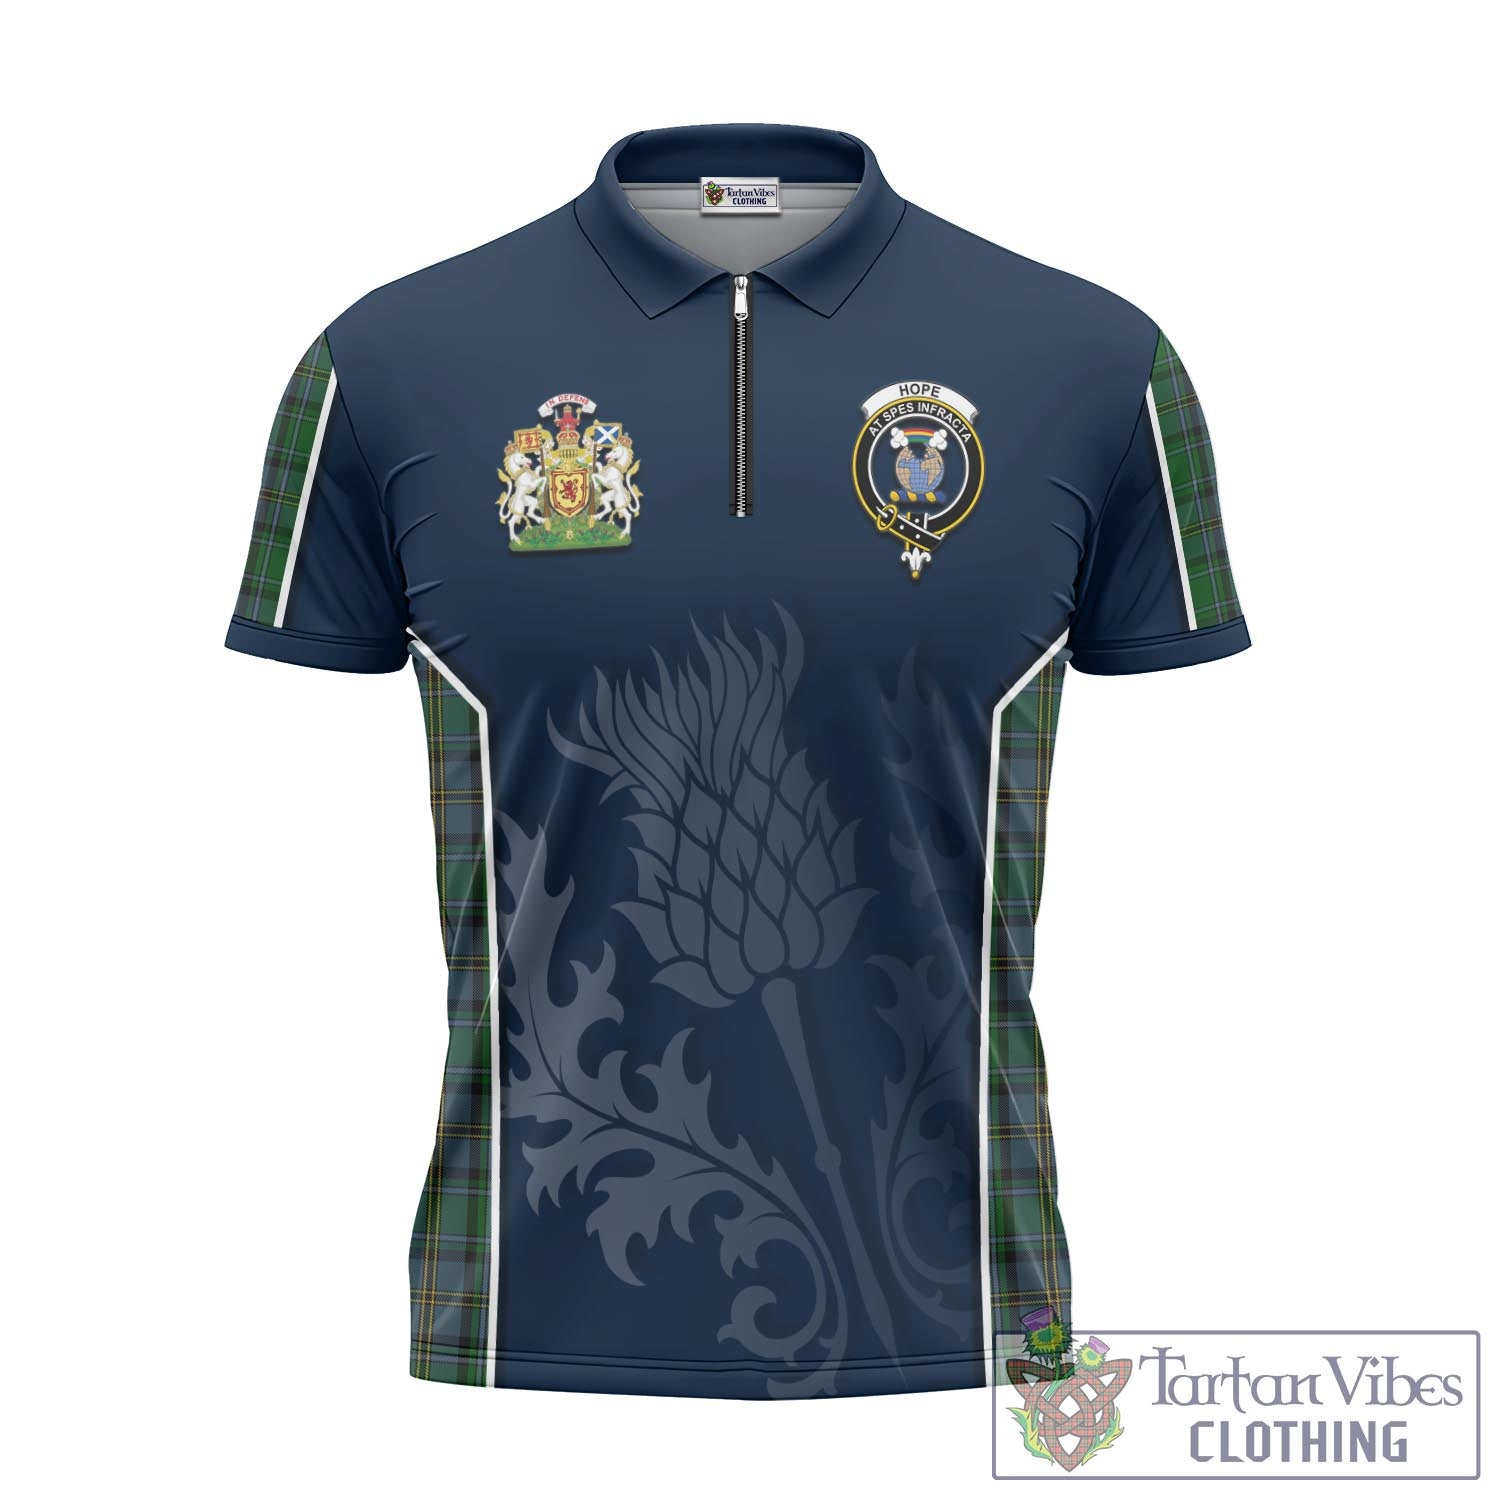 Tartan Vibes Clothing Hope Vere Tartan Zipper Polo Shirt with Family Crest and Scottish Thistle Vibes Sport Style